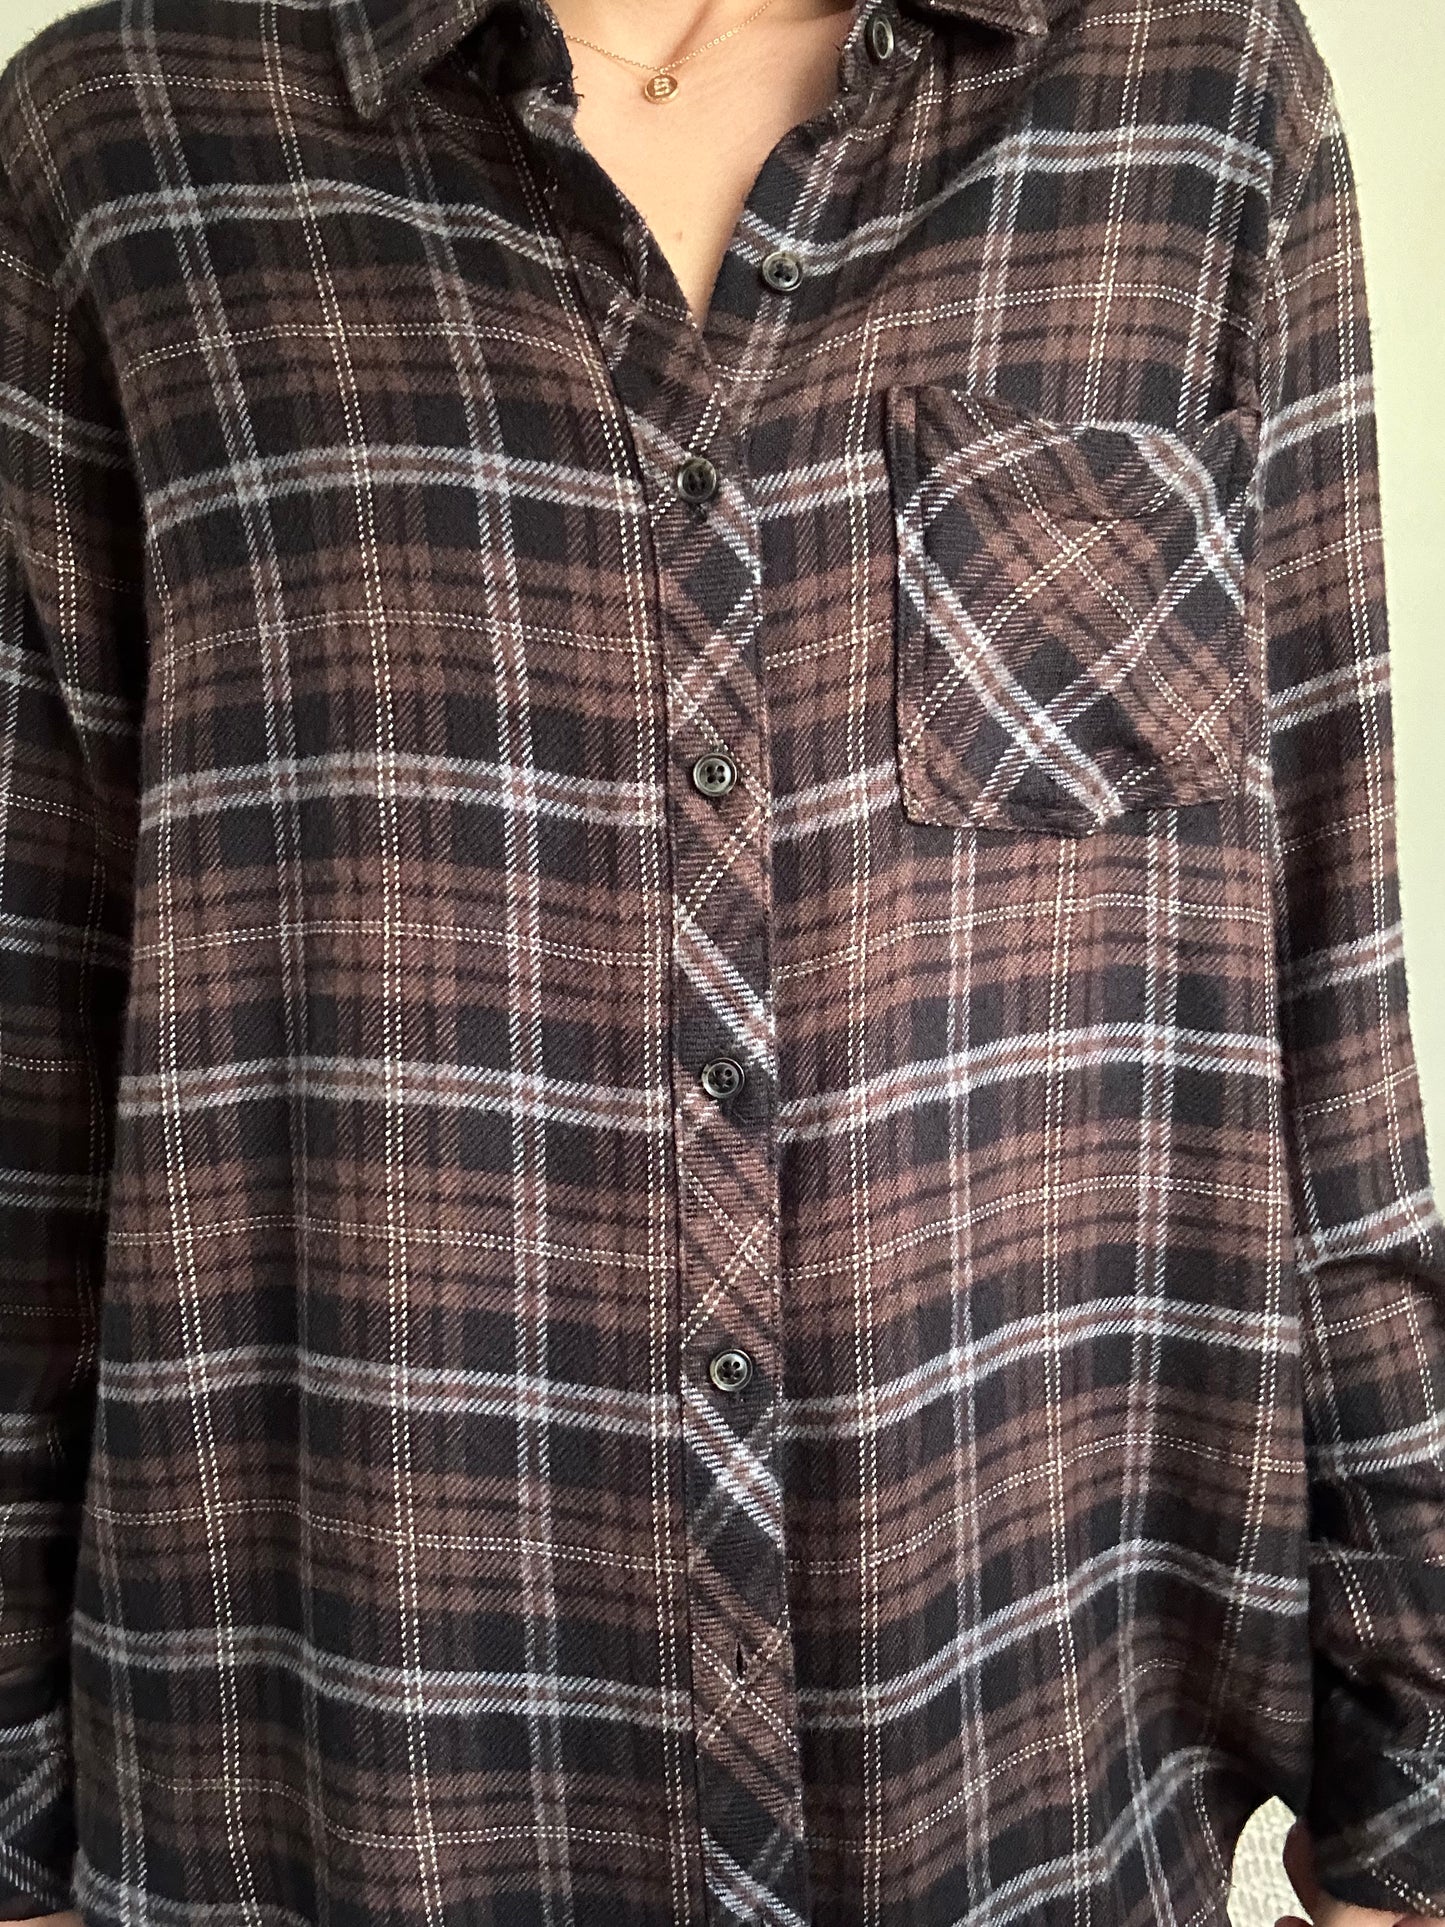 The Rowan Flannel. Black and brown soft flannel.